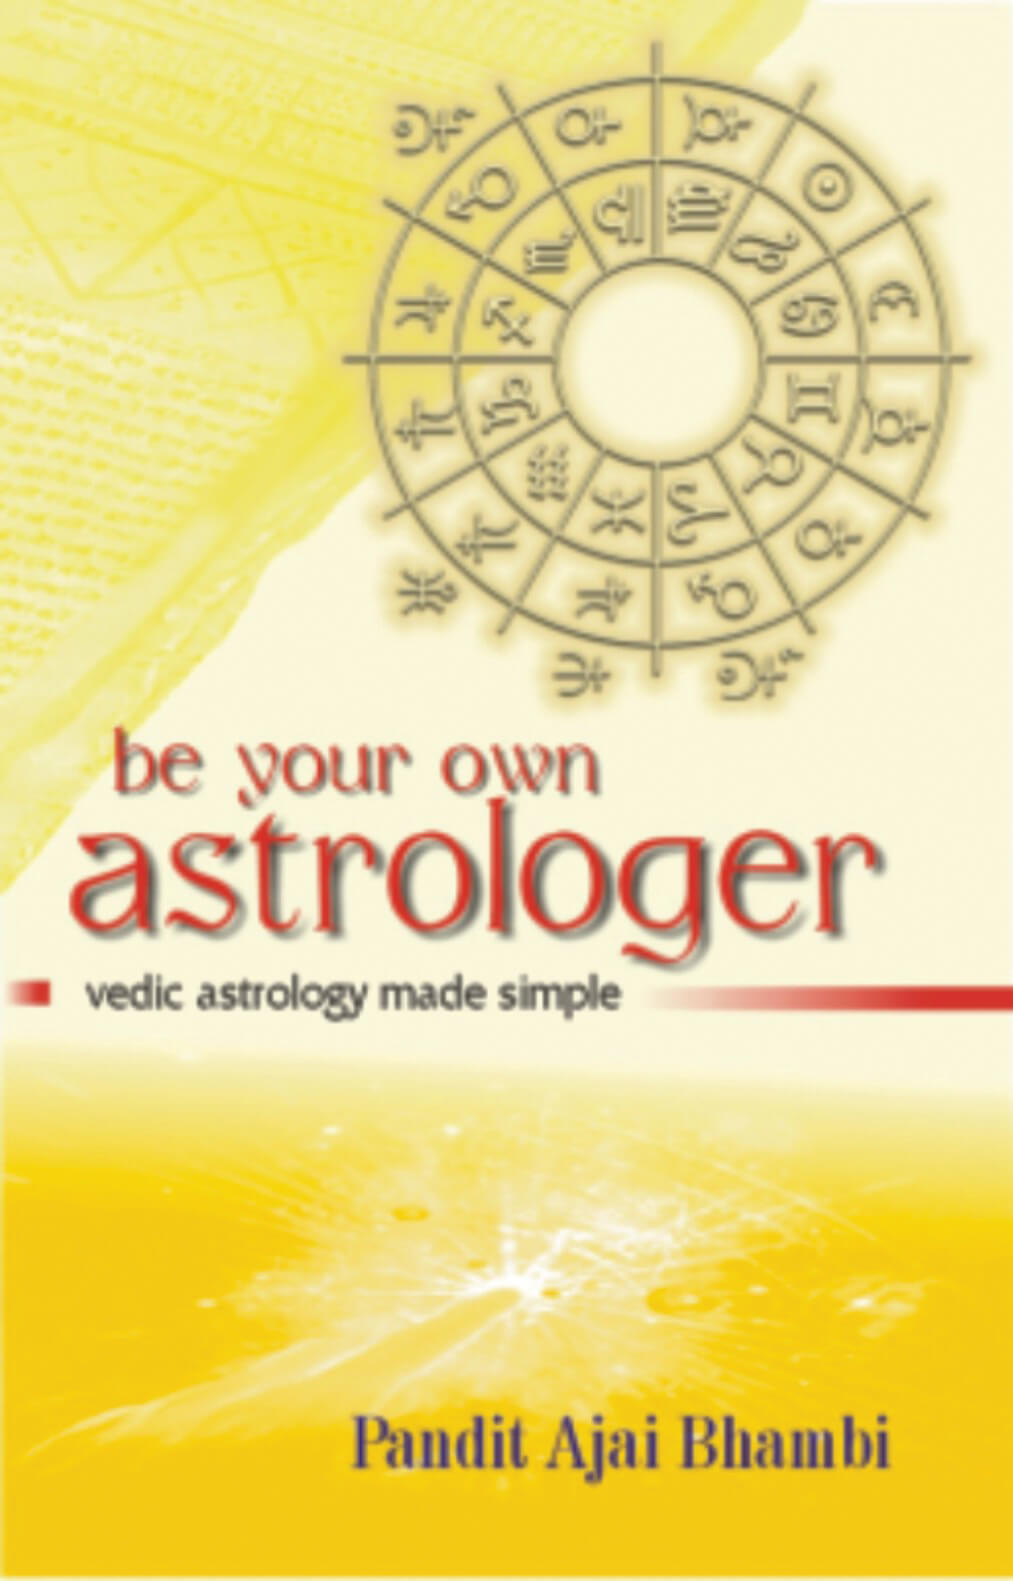 Be Your Own Astrologer: Vedic Astrology Made Simple